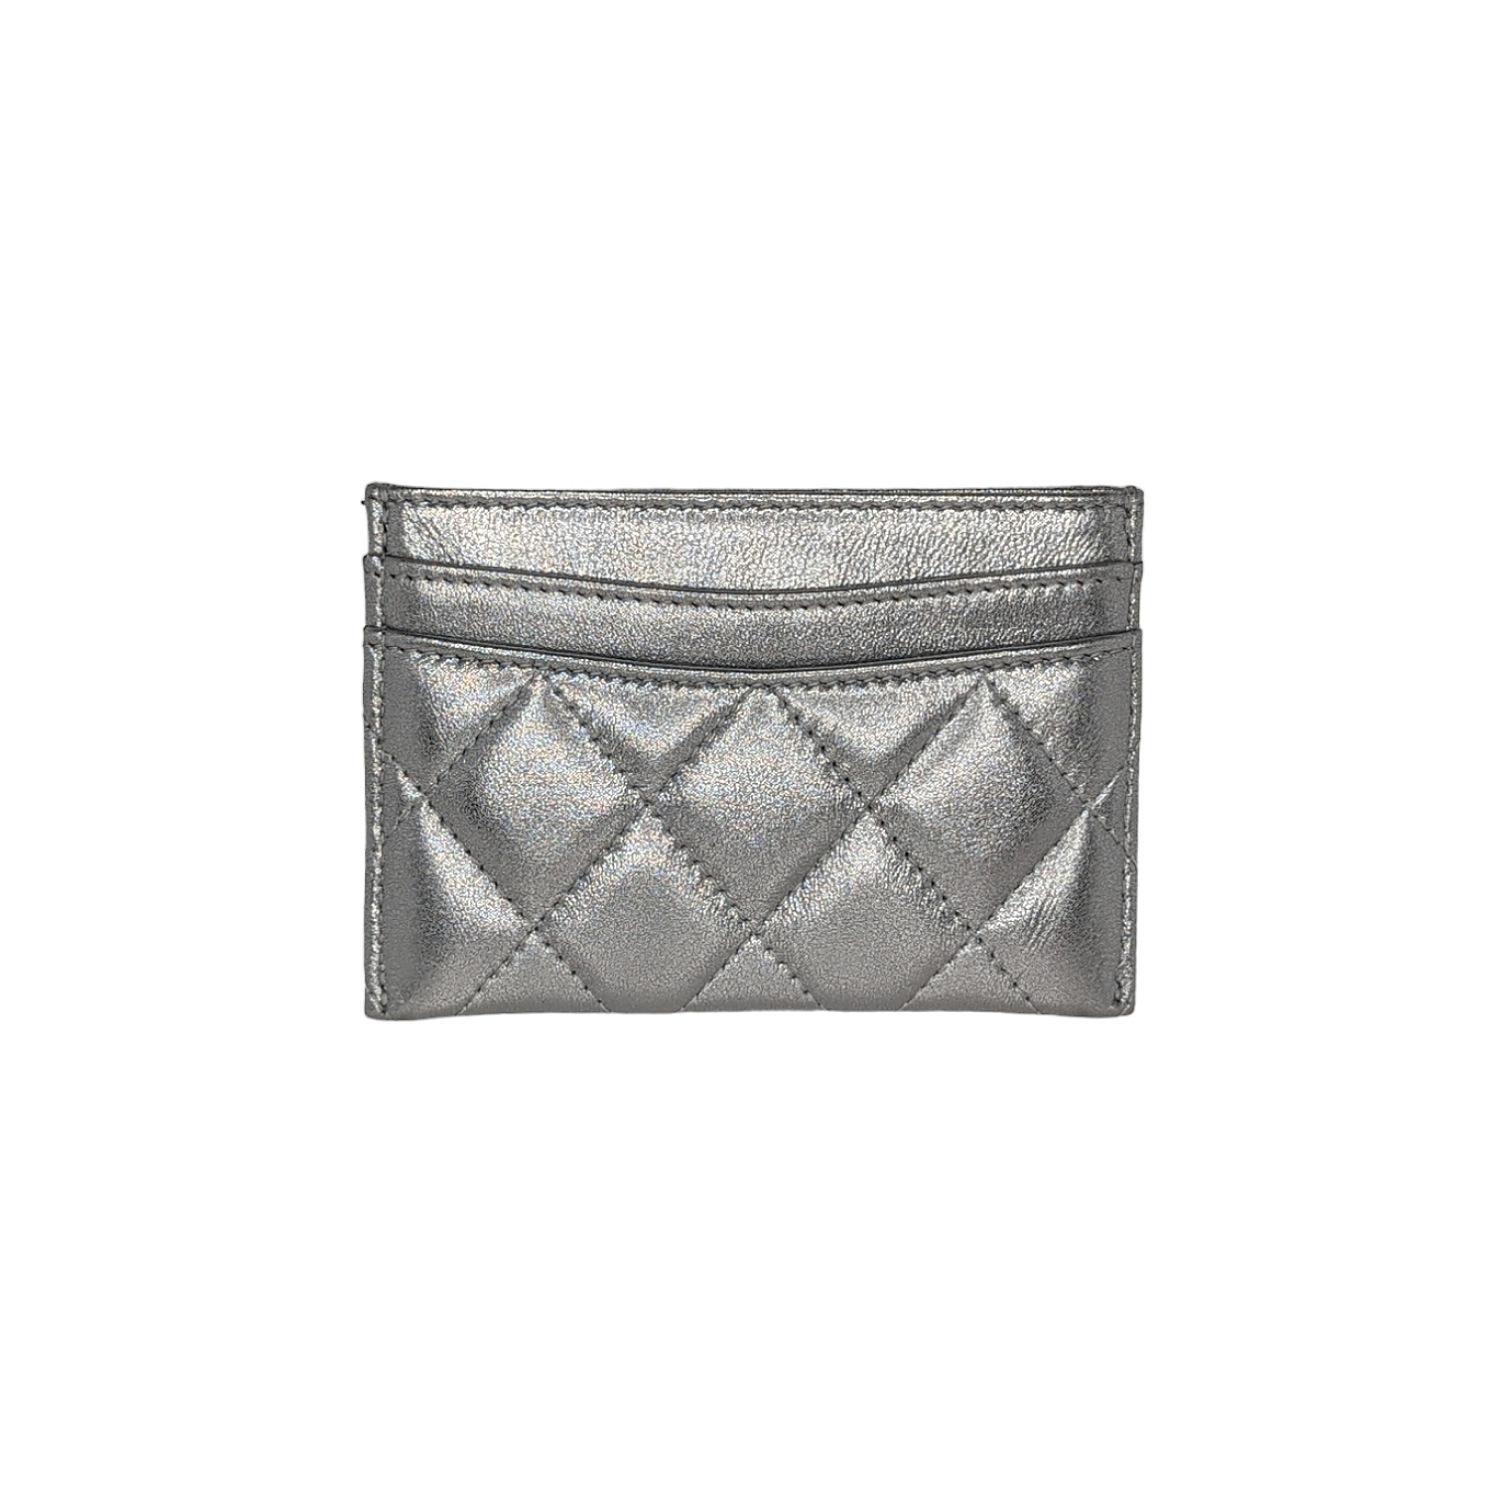 Chanel Metallic Lambskin Quilted CC Card Holder Silver In Excellent Condition For Sale In Scottsdale, AZ